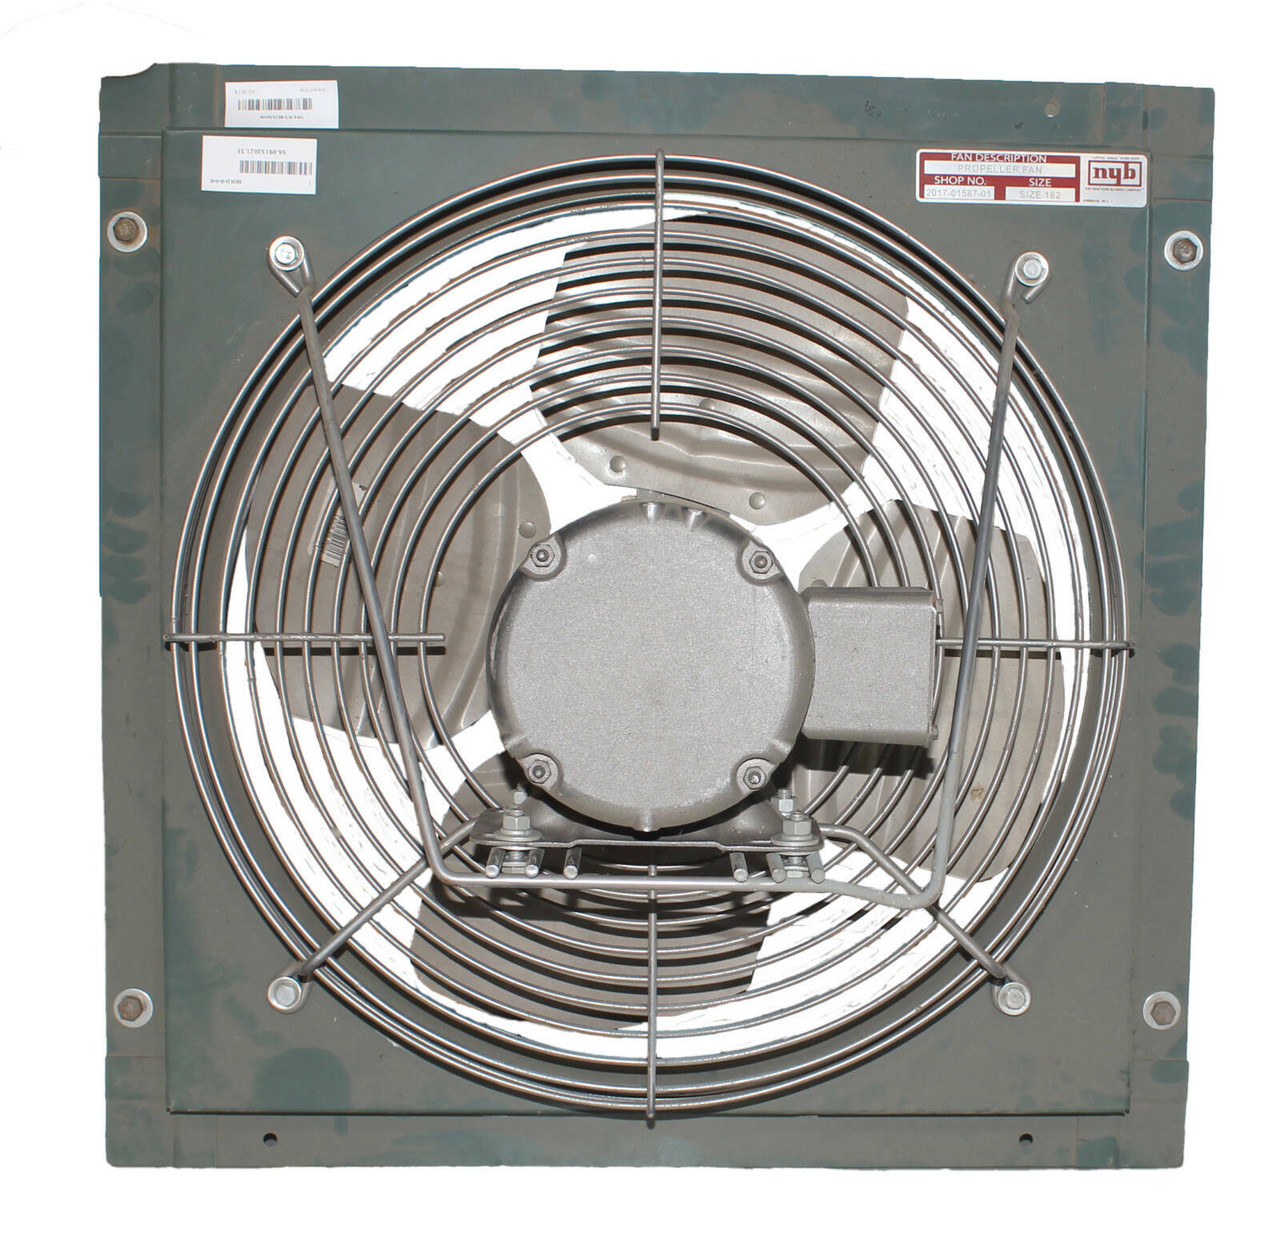 Baldor AOM3538 Fan with Motor 2.4-2.2/1.1A 208-230/460V 1725RPM .5 Air OverHP with Propeller Fan 2017-01587-01 Size 182